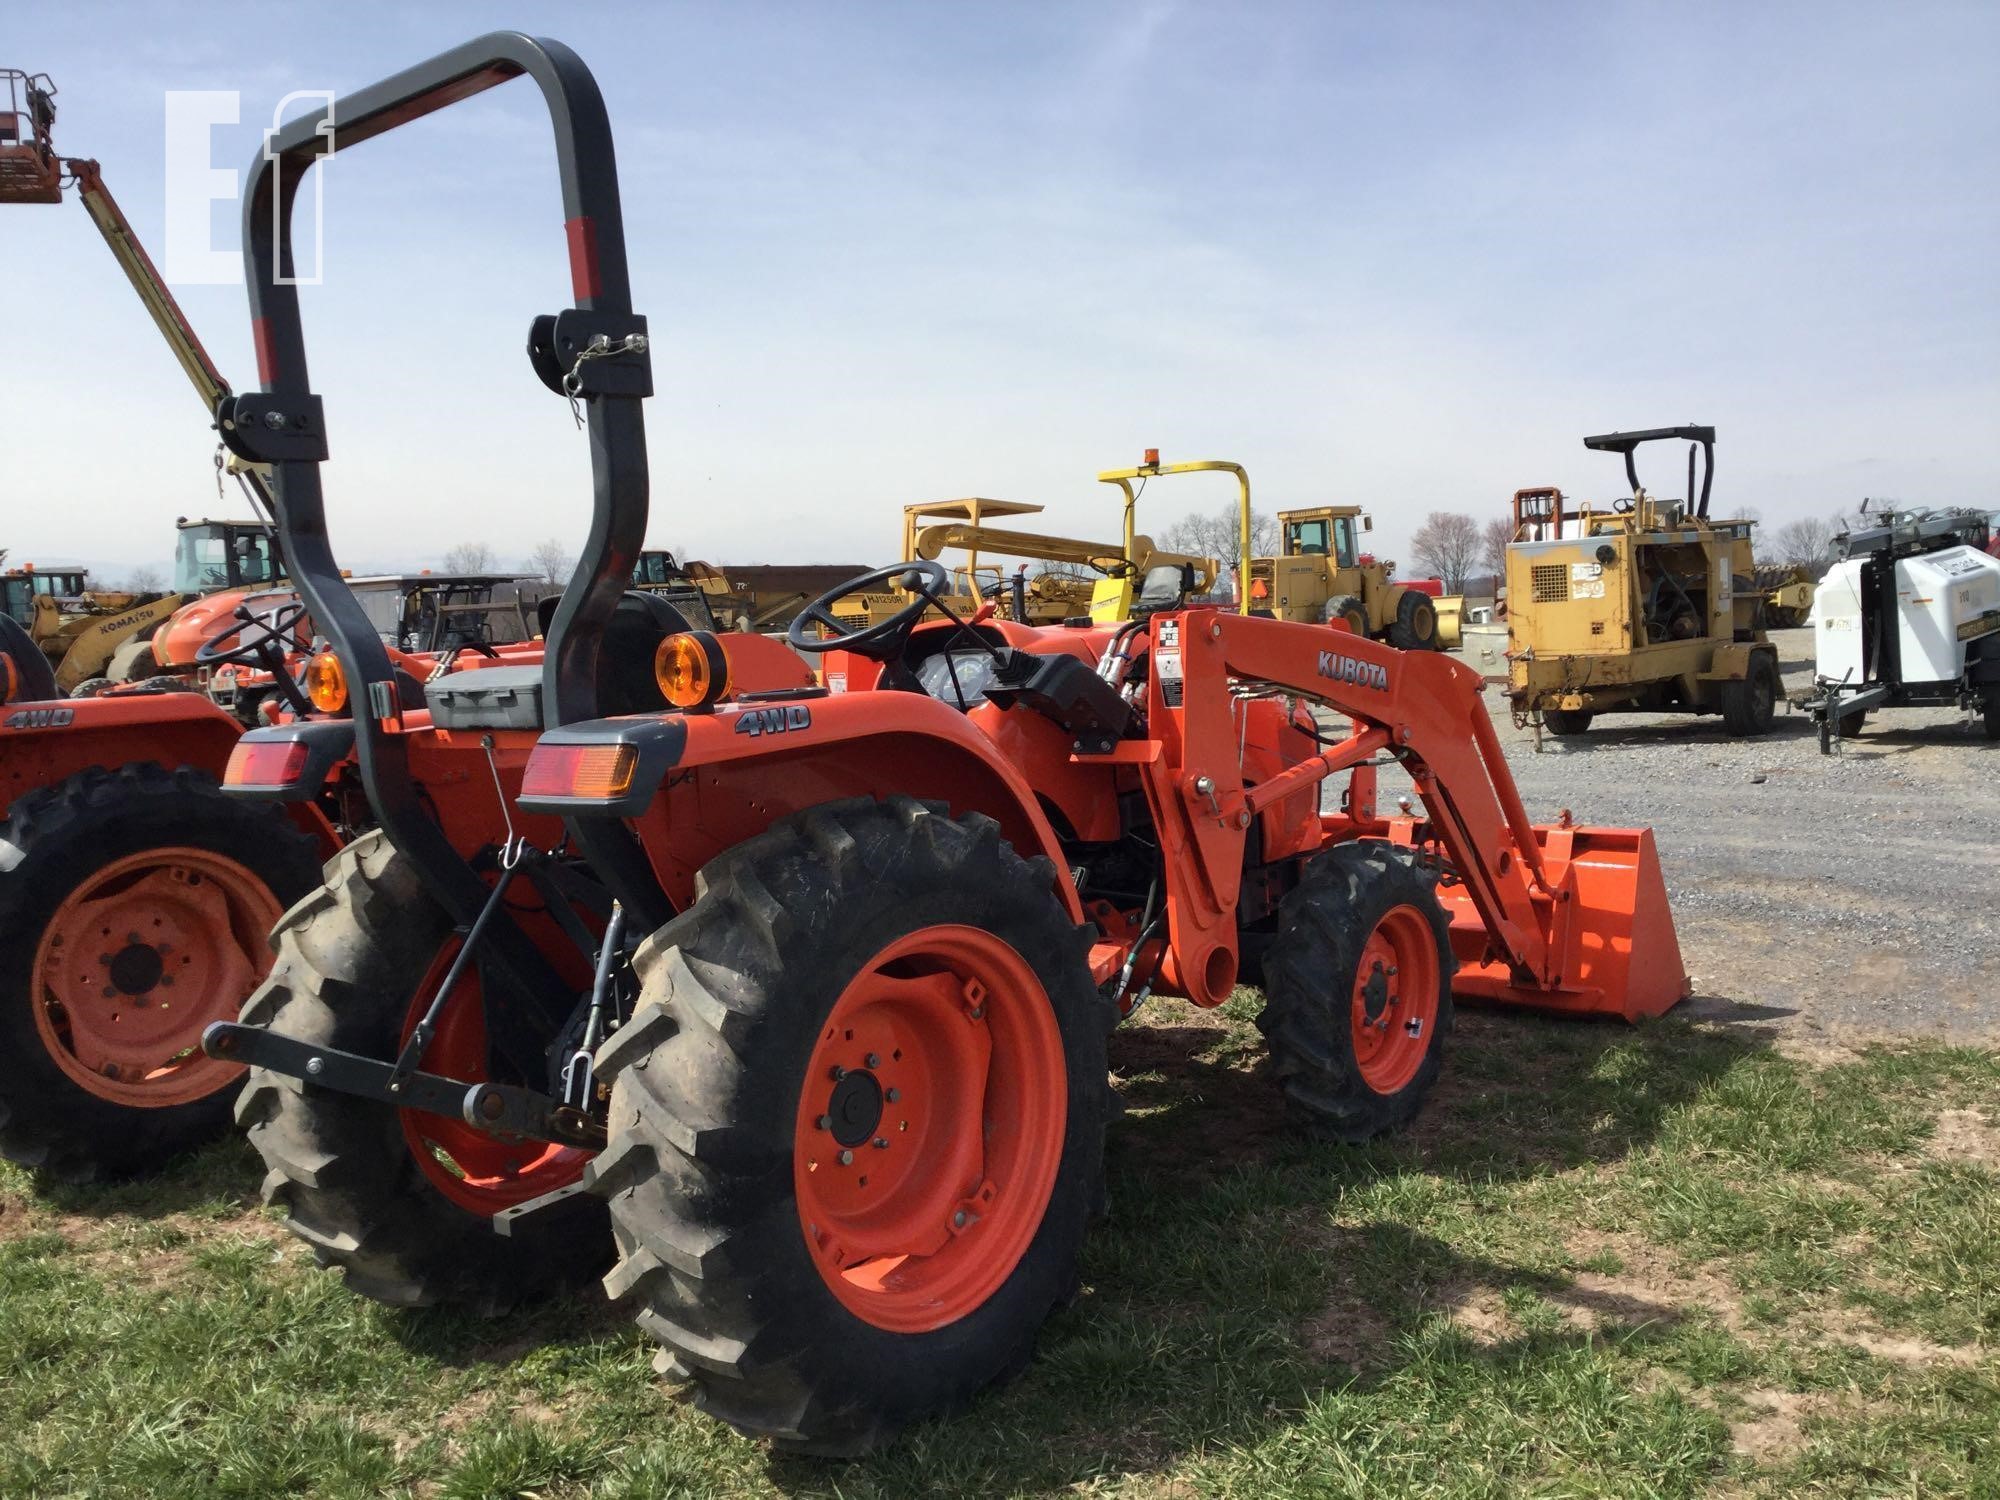 KUBOTA L2501 For Sale In Frederick, Maryland | EquipmentFacts.com